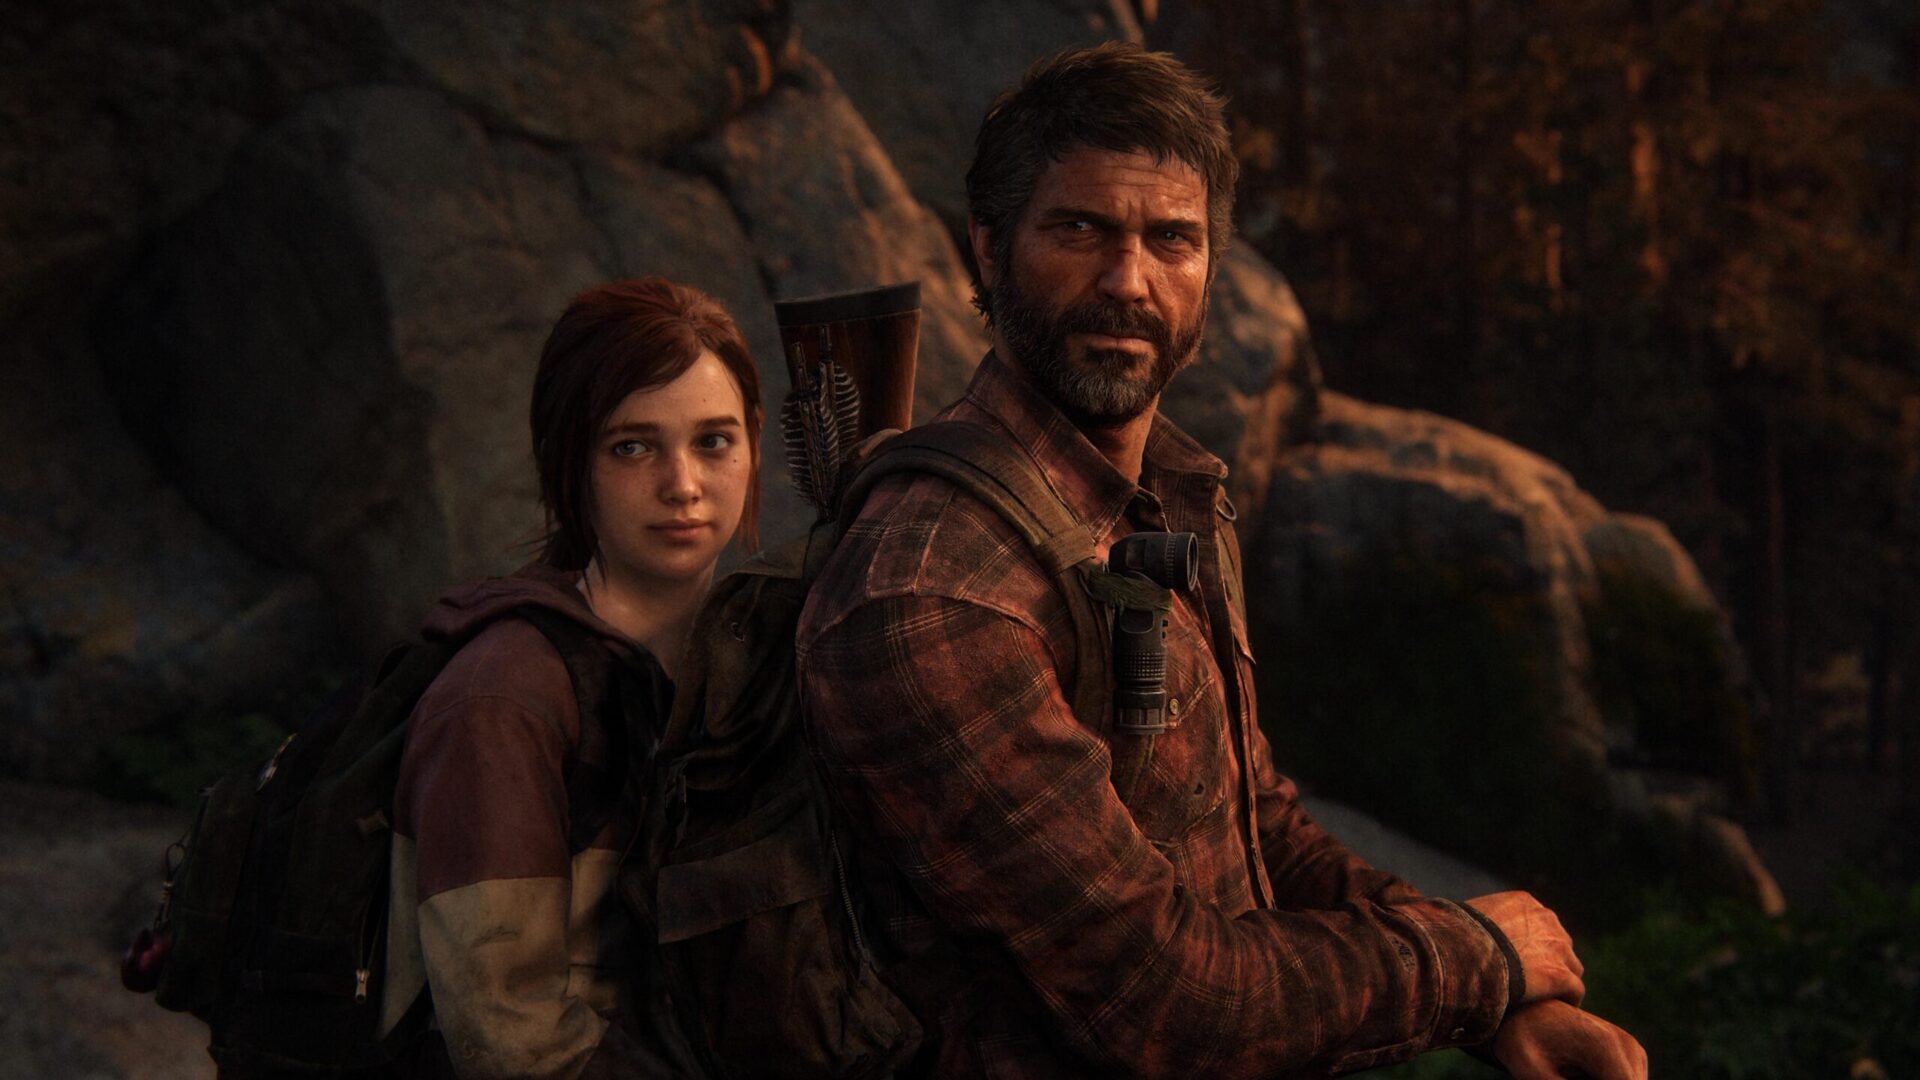 The Last of Us Part I is plagued with bugs on PC, Naughty Dog working on  fixes [Update] - Neowin